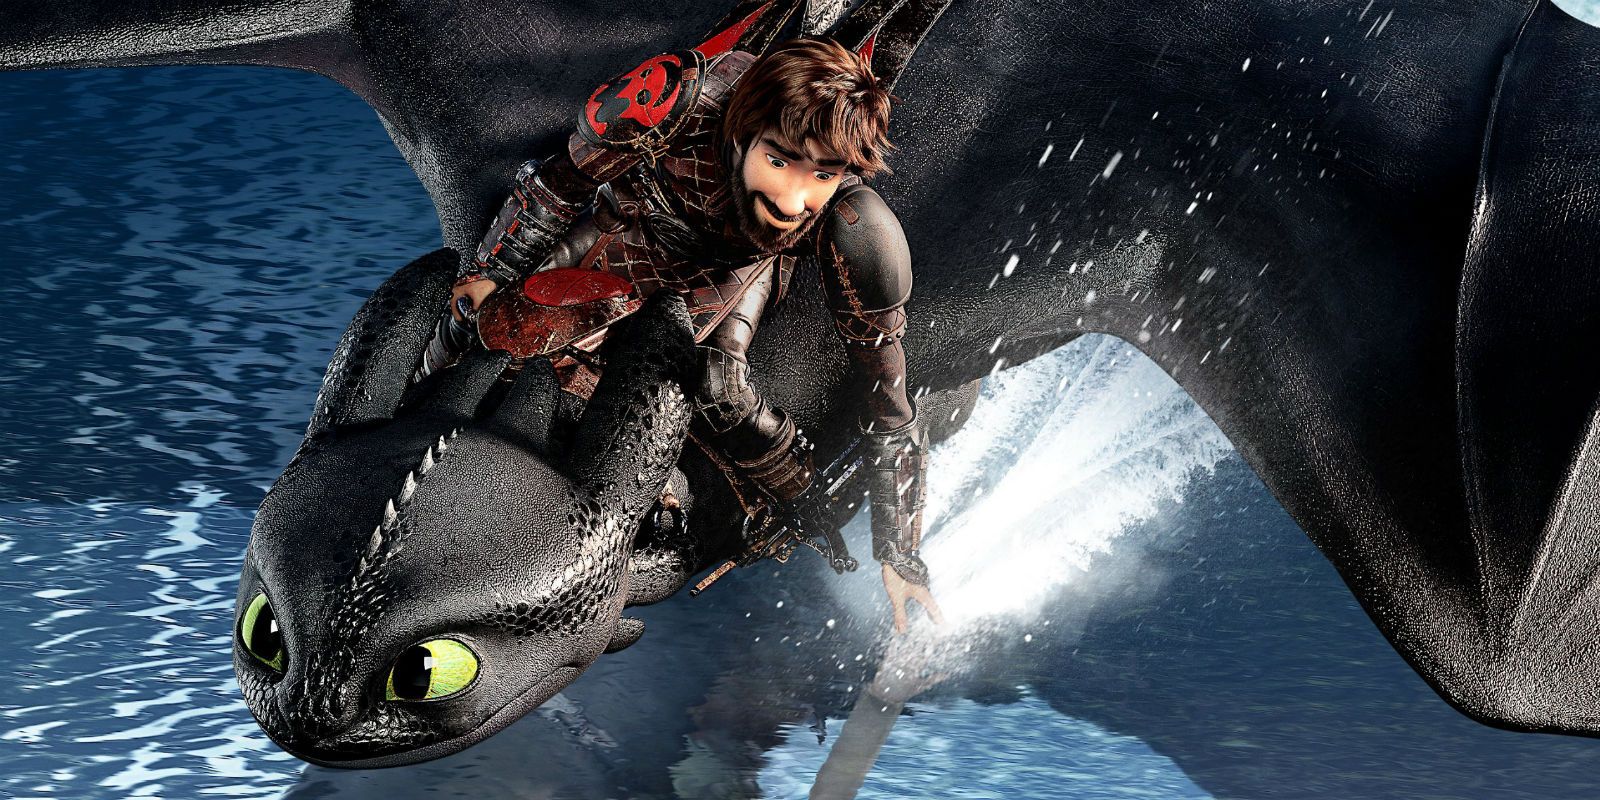 How To Train Your Dragon 3 Ending Explained: Dragons Leave & Adult Hiccup